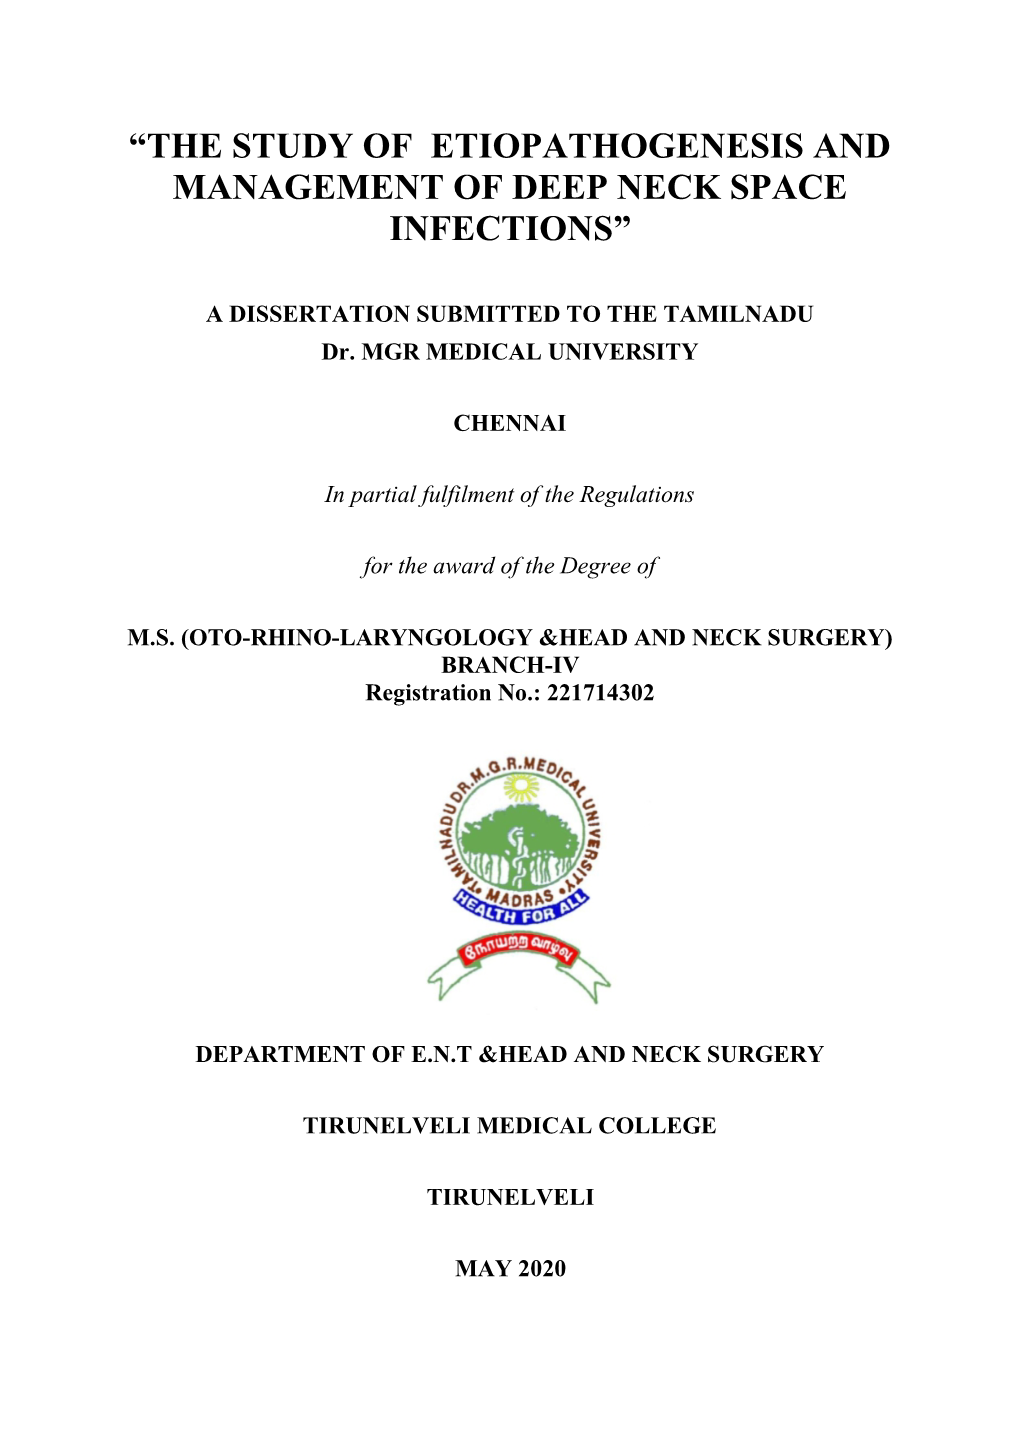 “The Study of Etiopathogenesis and Management of Deep Neck Space Infections”